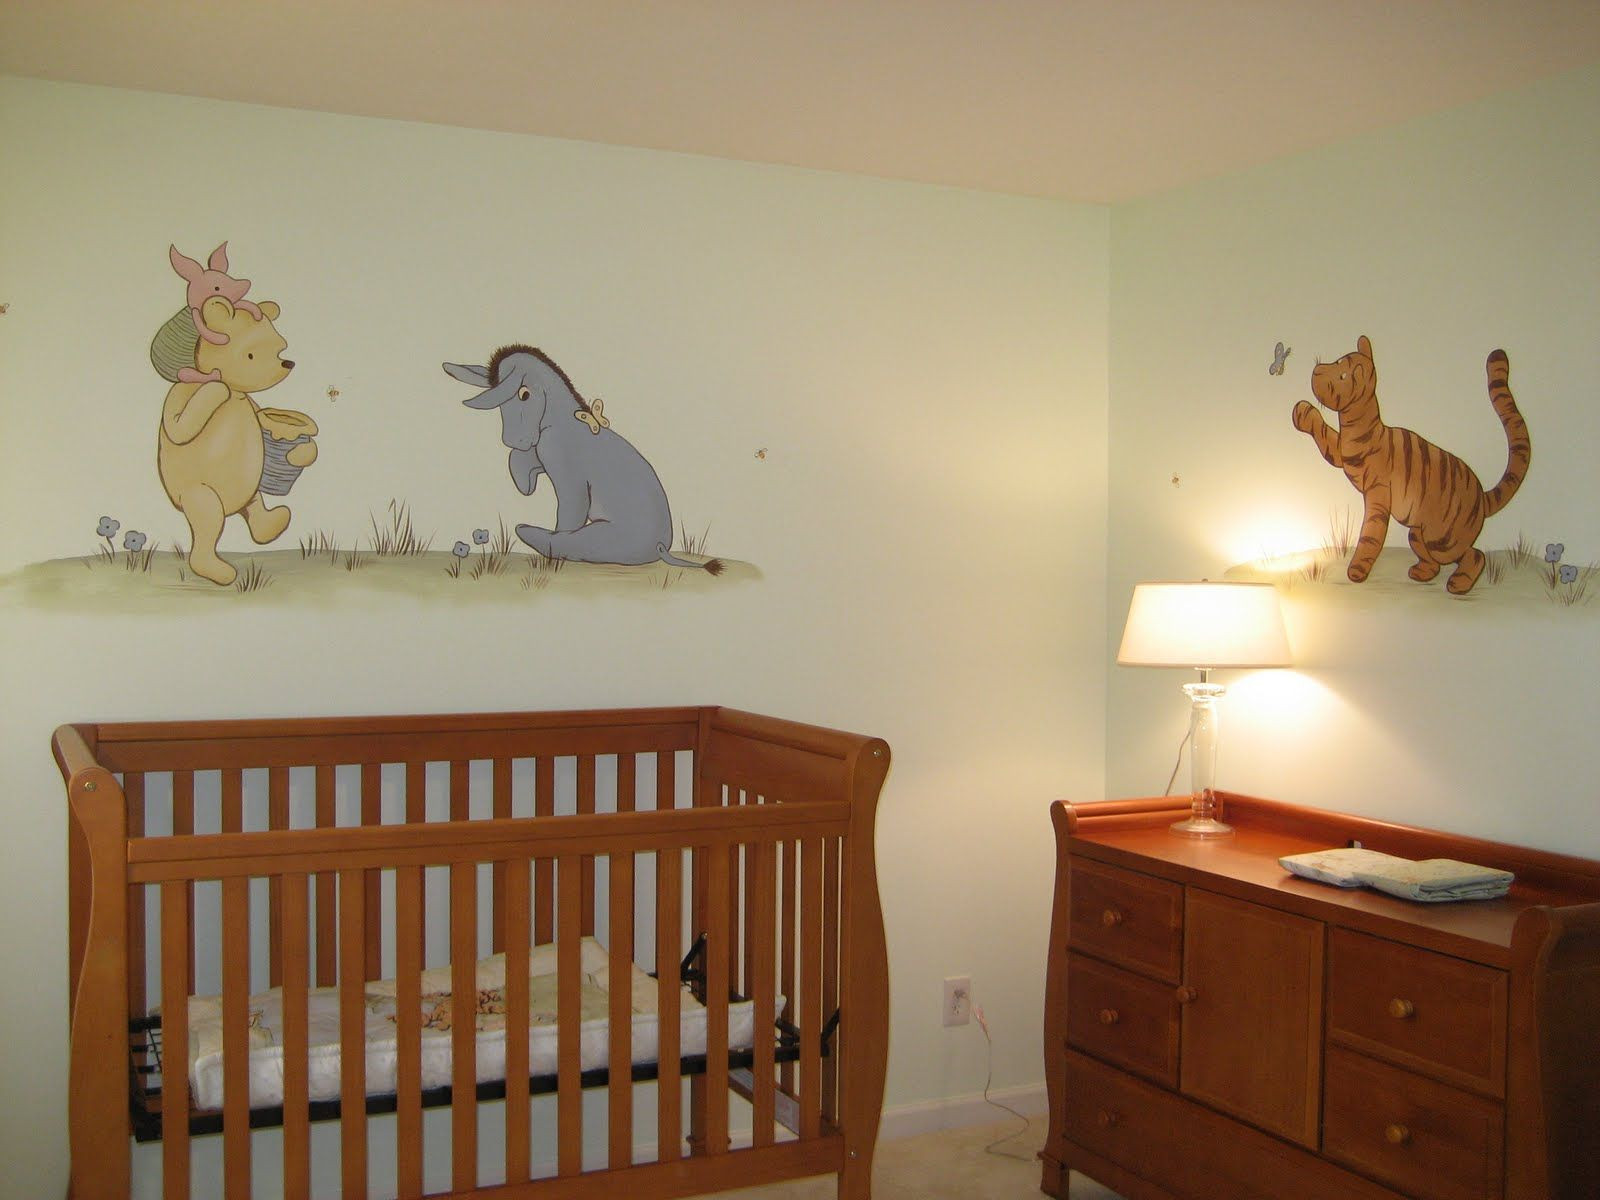 Winnie The Pooh Baby Decor
 Winnie the Pooh nursery I would have those close to the